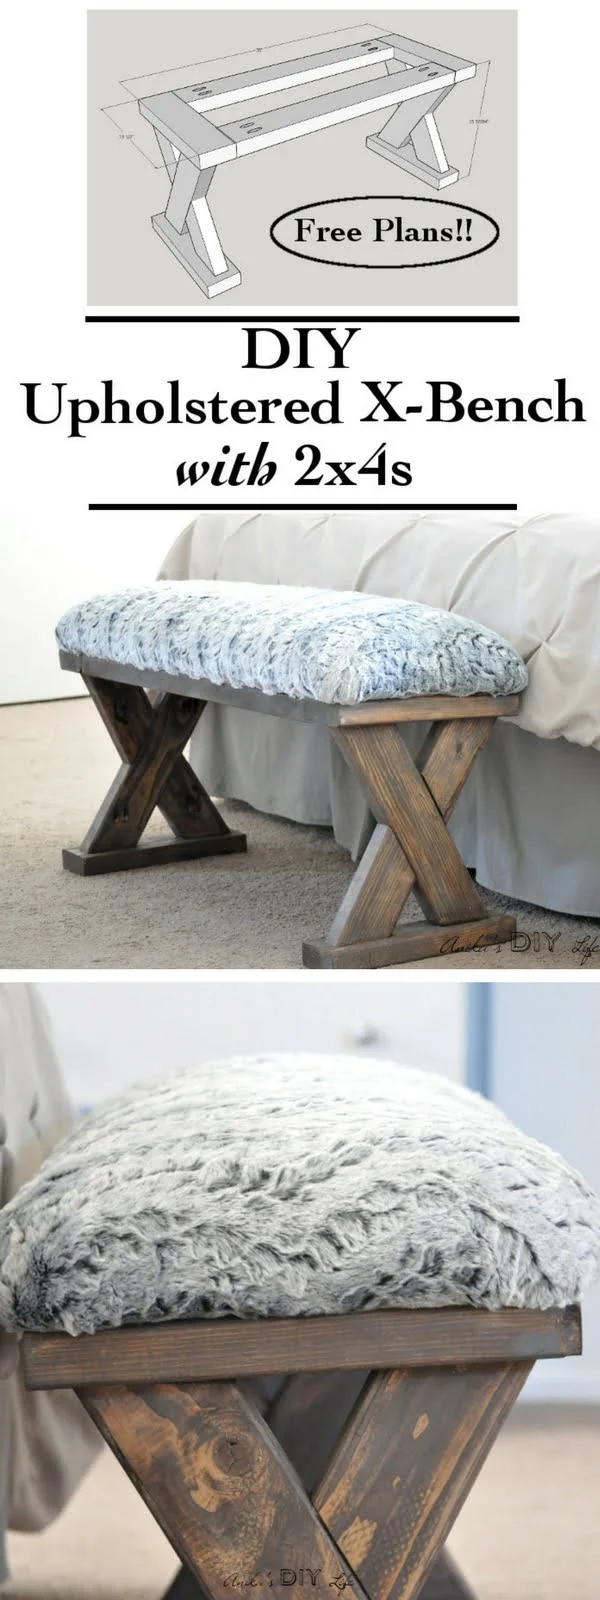 Check out the tutorial on how to make a DIY upholstered bench